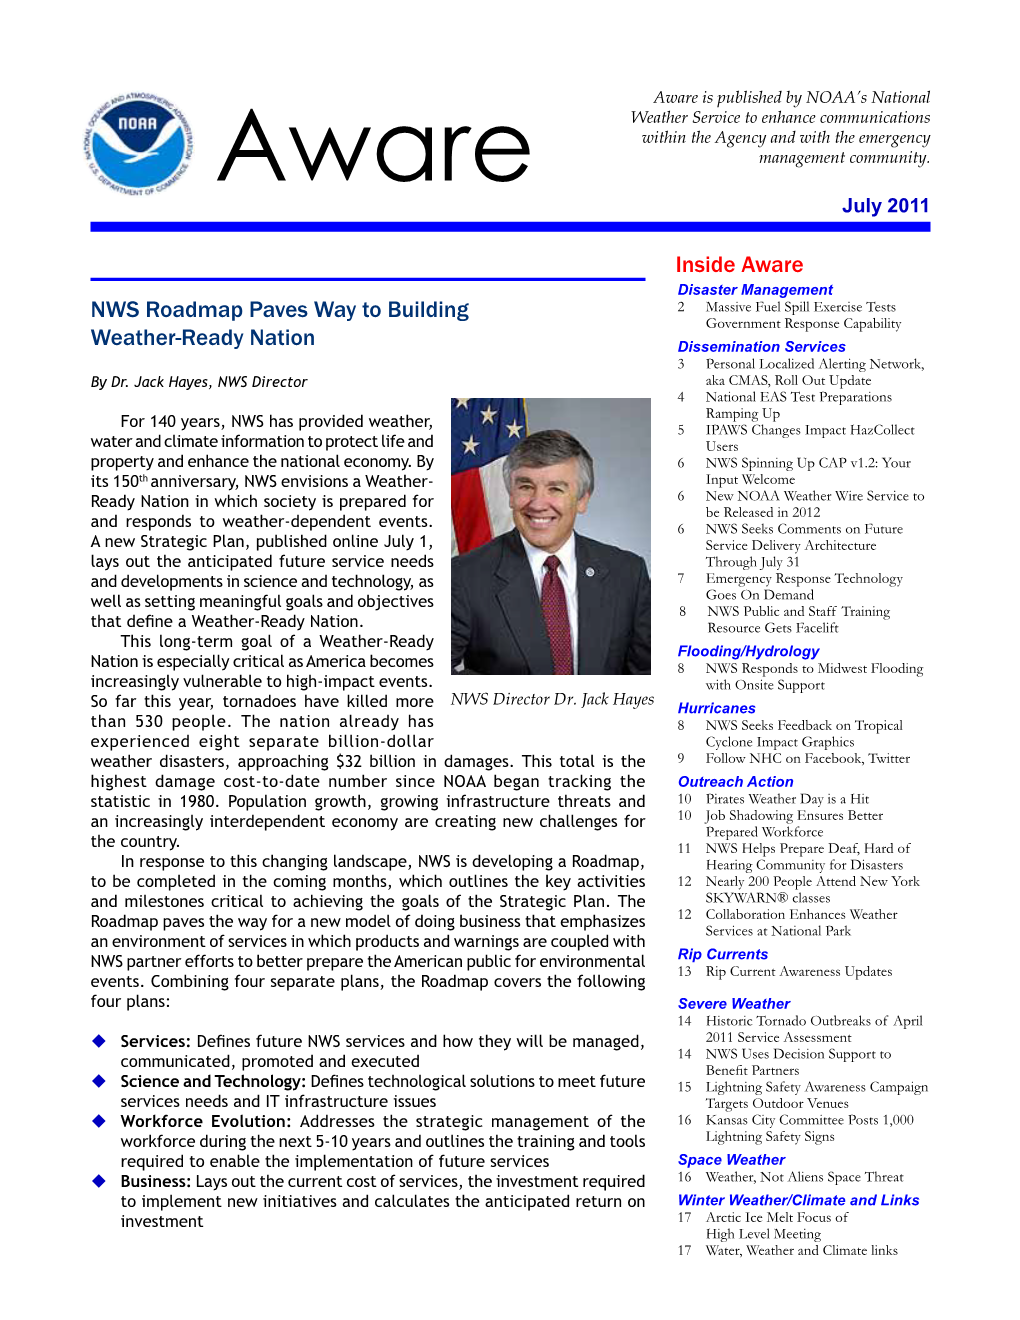 Summer 2010 NWS Aware Report, Cover Article by Wade Witmer, Deputy Director, FEMA IPAWS